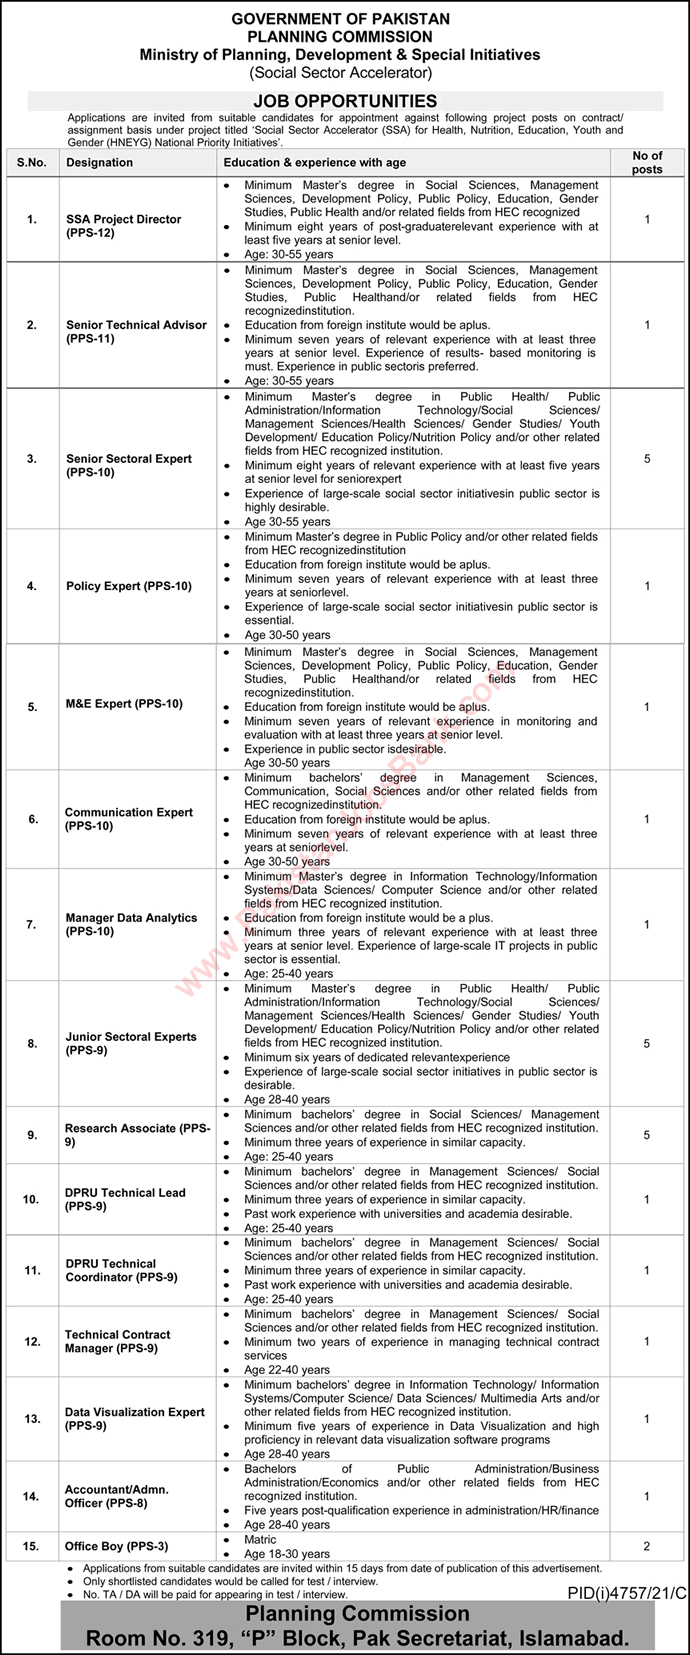 Planning Commission Islamabad Jobs 2022 Research Associates, Accountant / Admin Officer & Others Latest